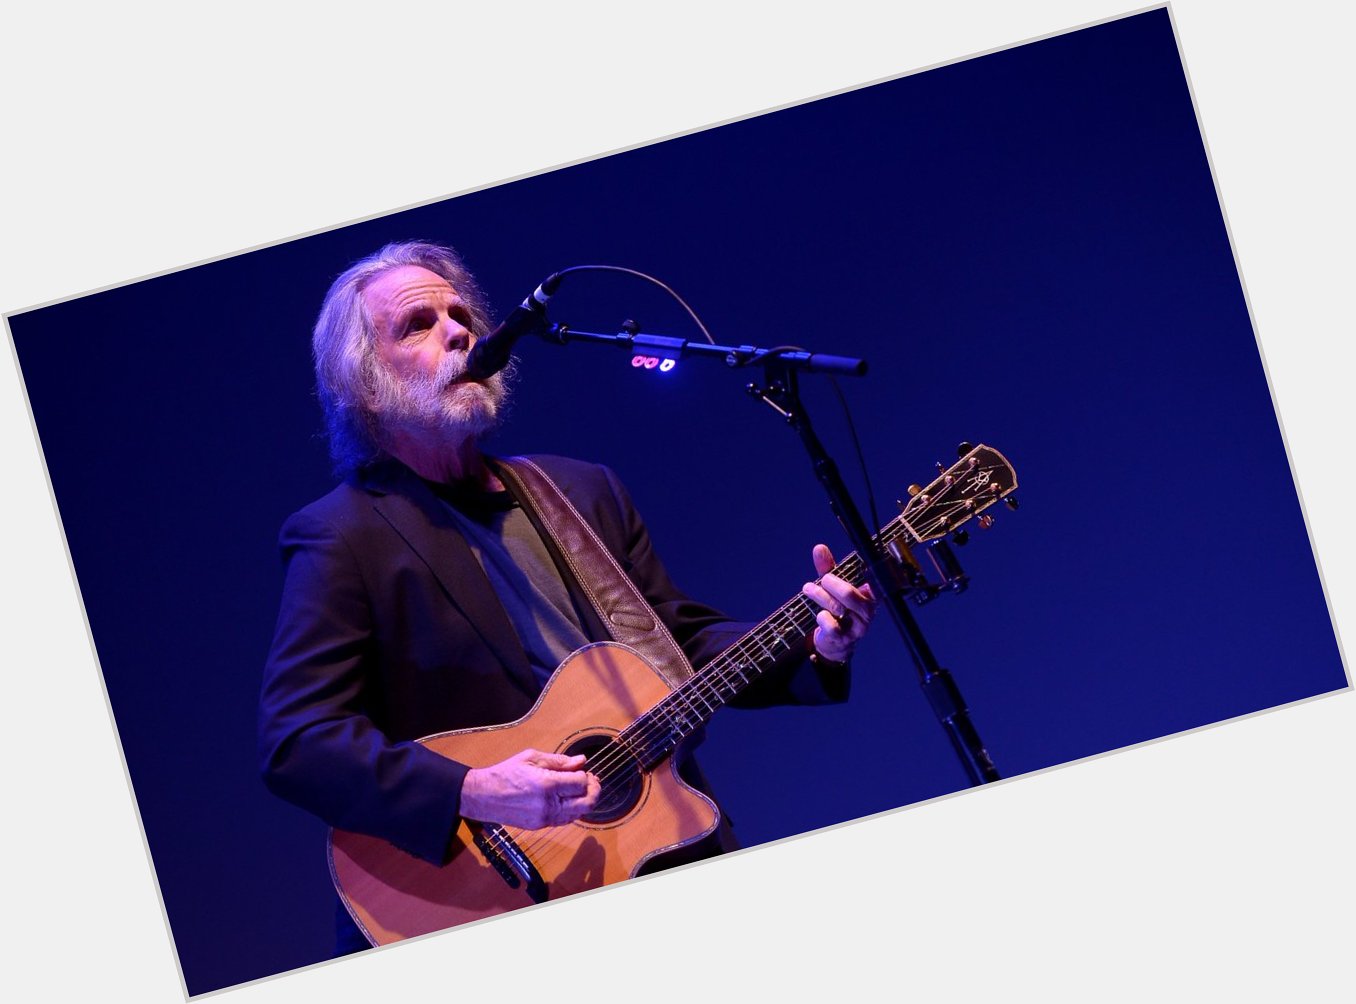 Happy birthday Bob Weir! Check out our recent interview with the Grateful Dead guitarist  